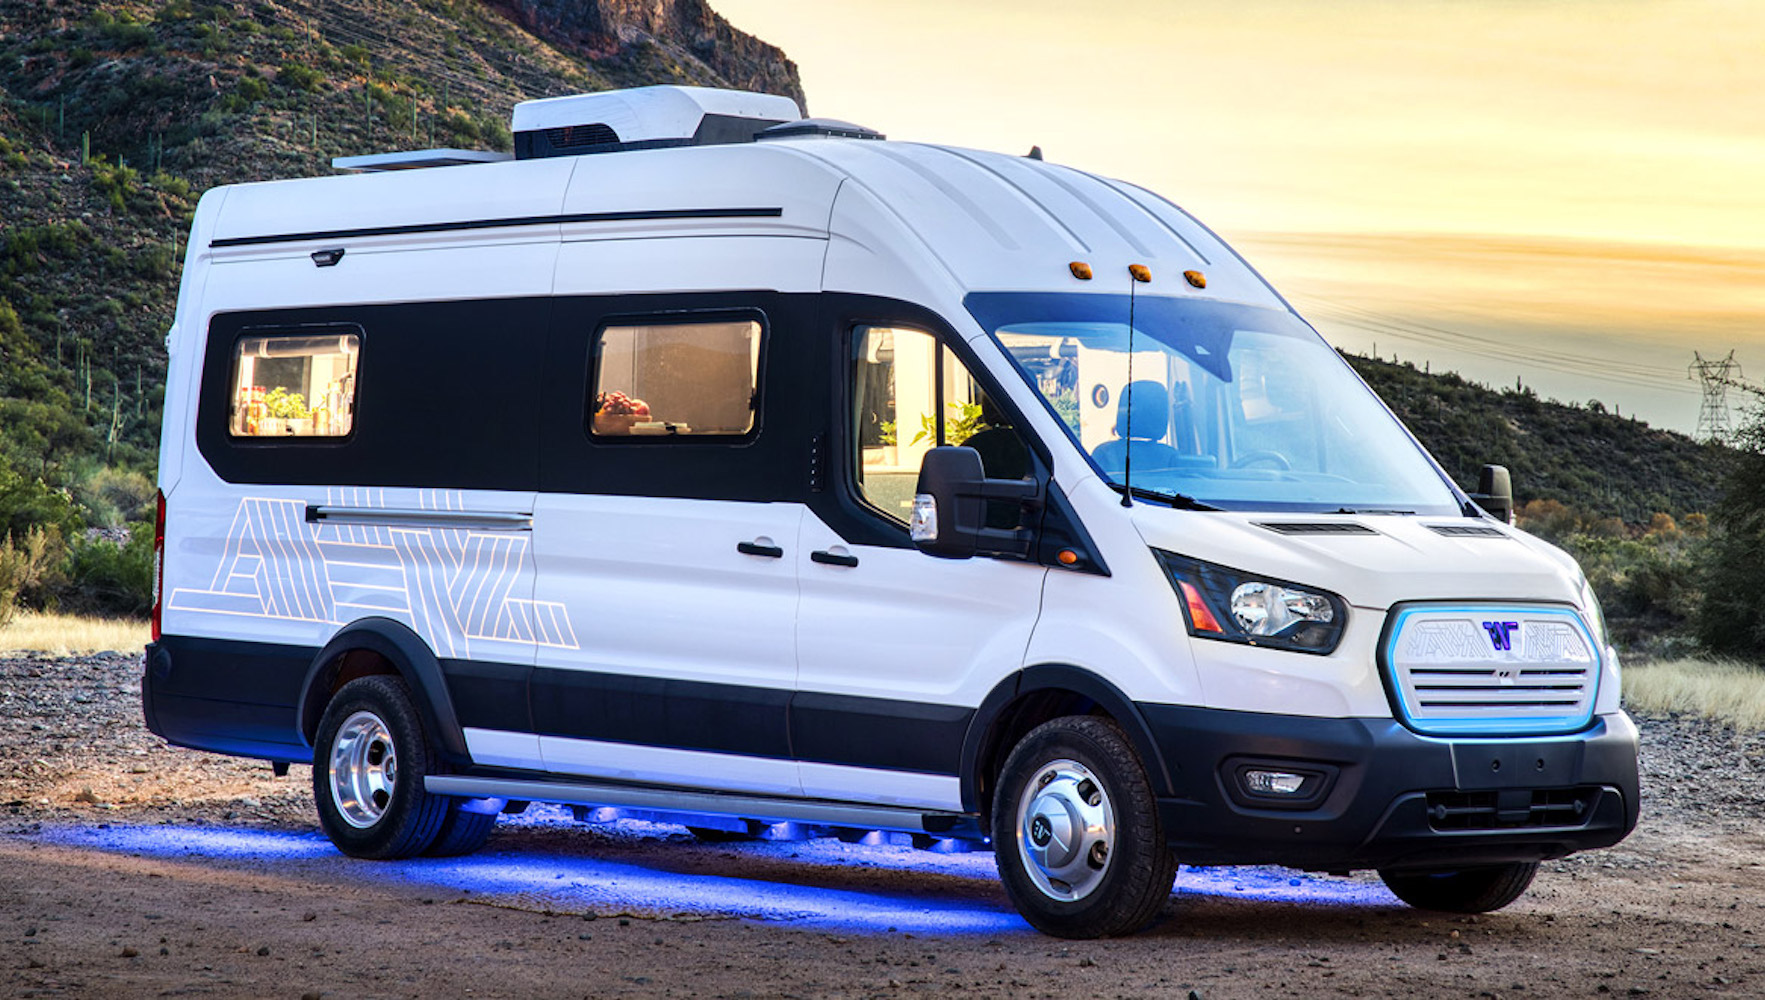 The Winnebago e-RV, an electric concept vehicle based on the Ford Transit van sitting on a road against a sunset in the background